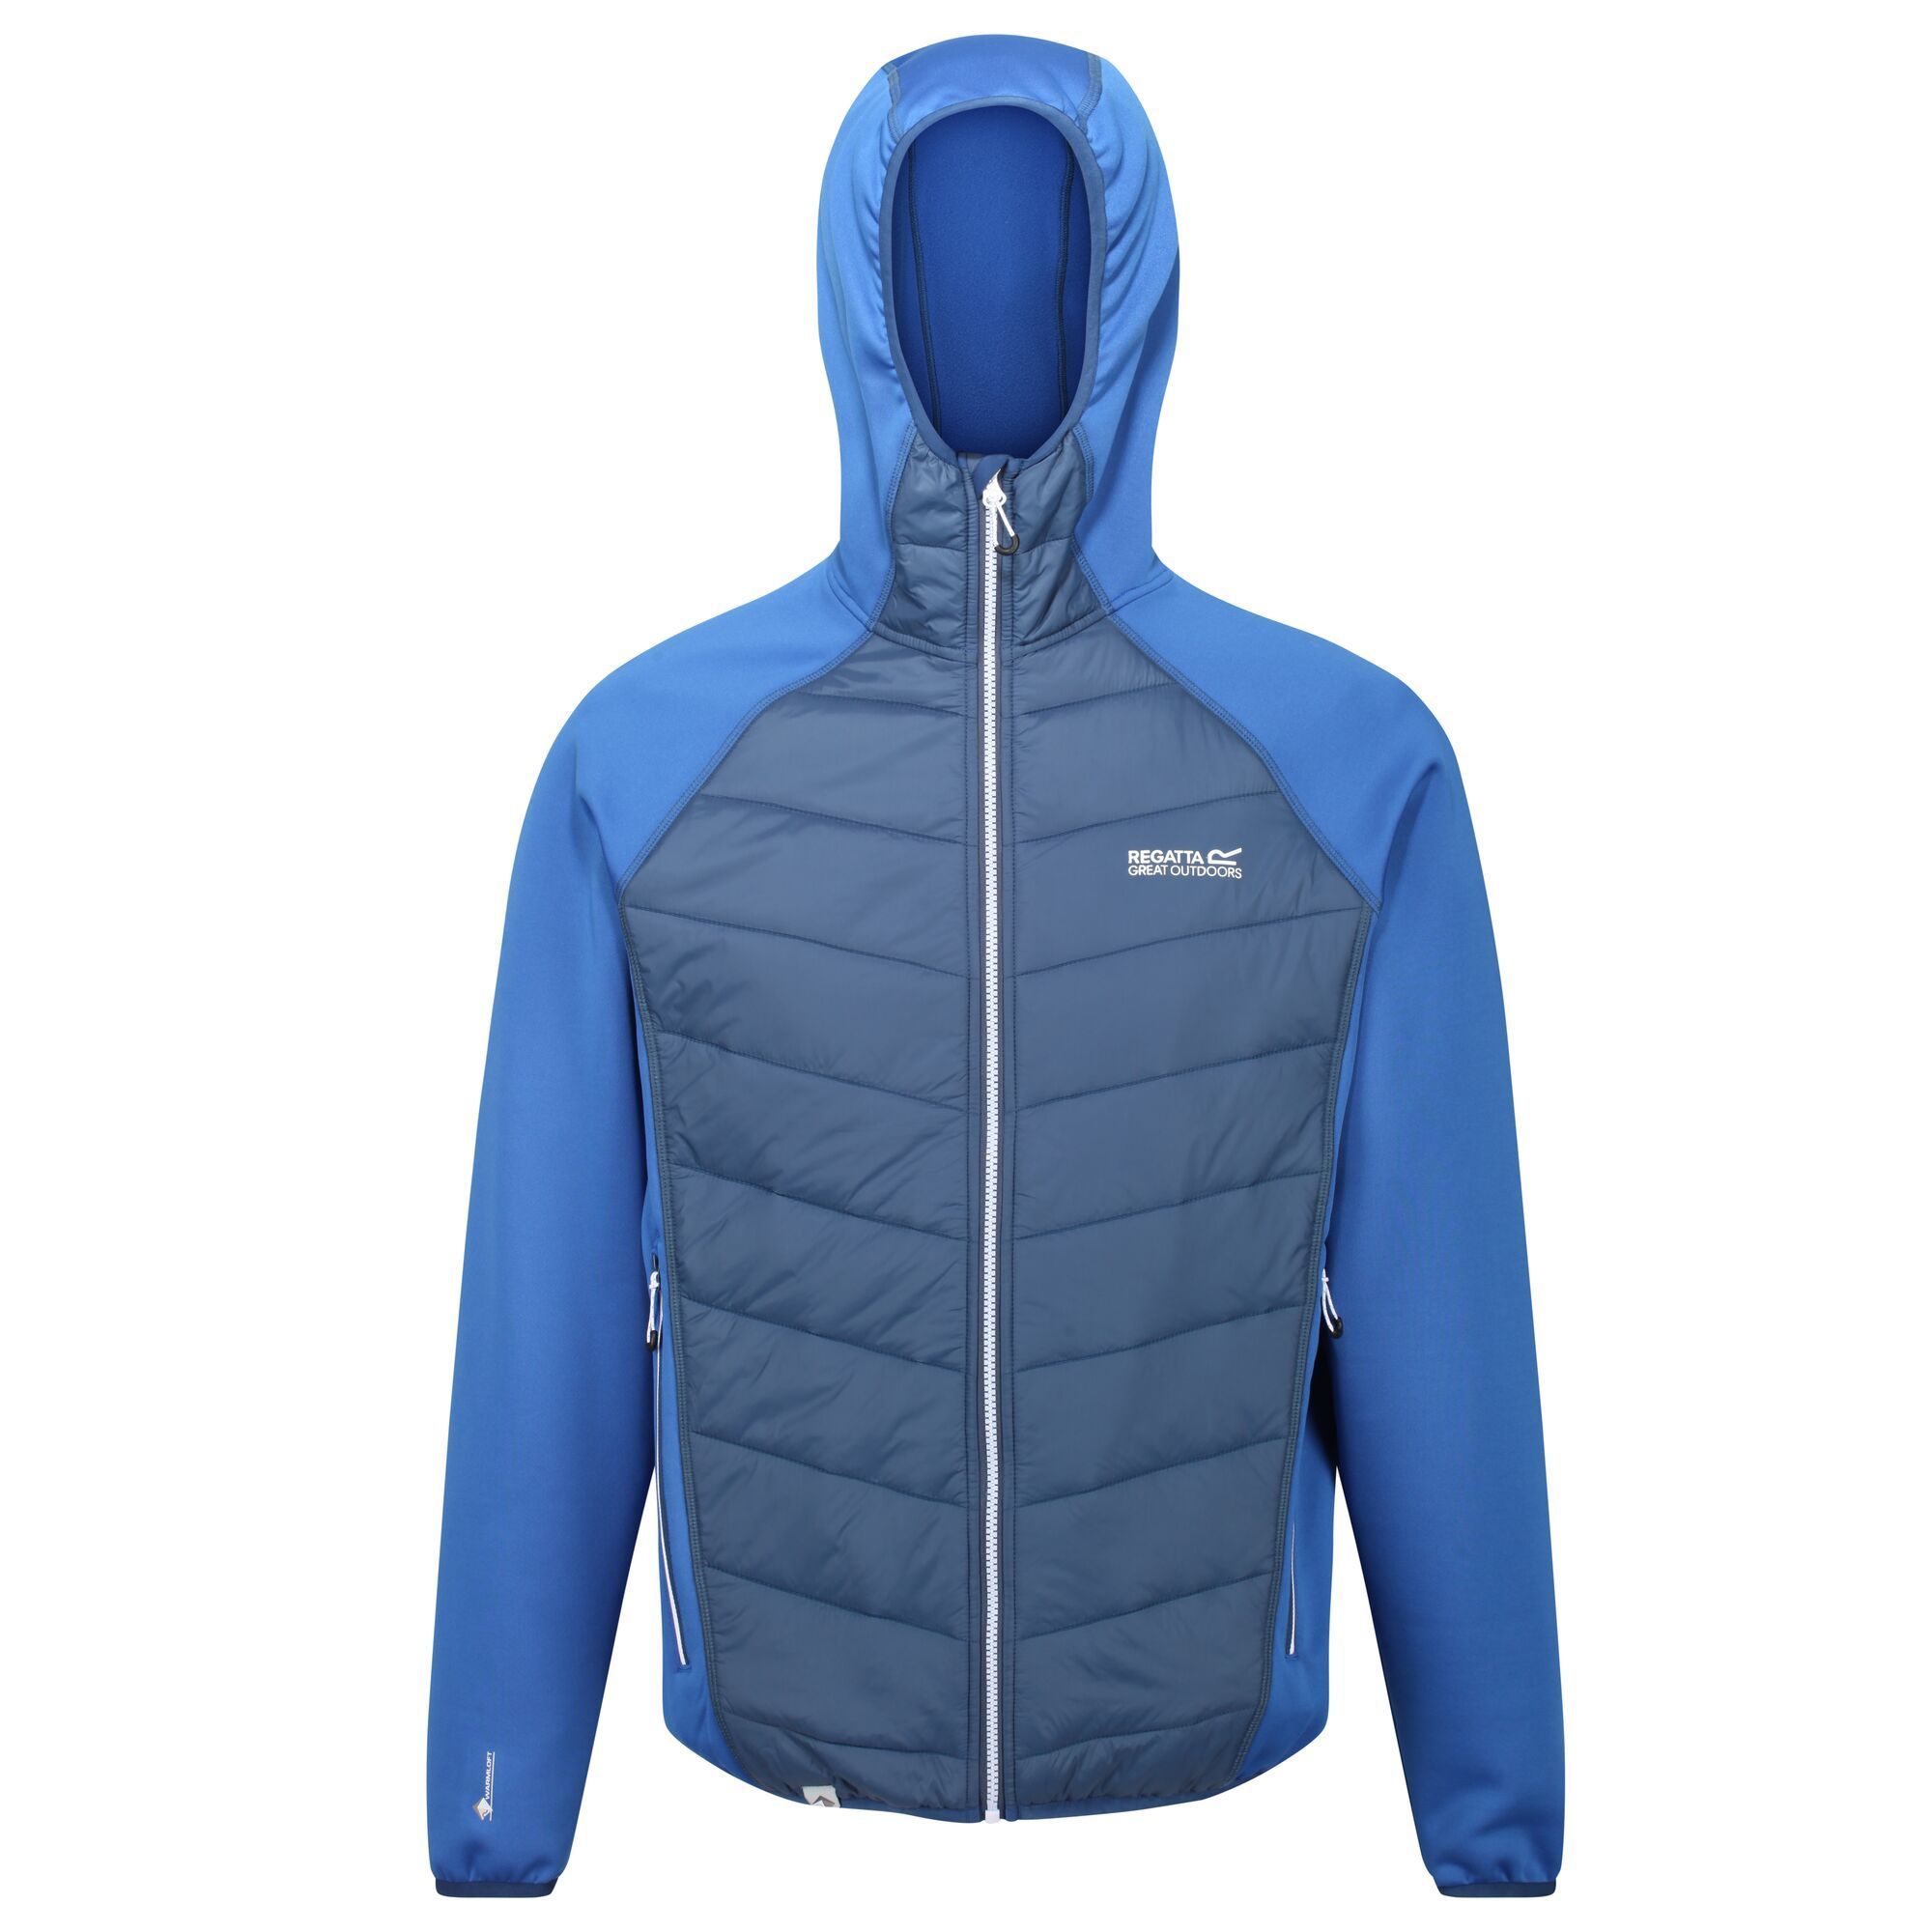 100% polyamide. Extol stretch hood, sleeves and side panels for fit and freedom of movement. Water repellent insulation. Durable water repellent finish to body. Easily compressible. Lightweight fill.